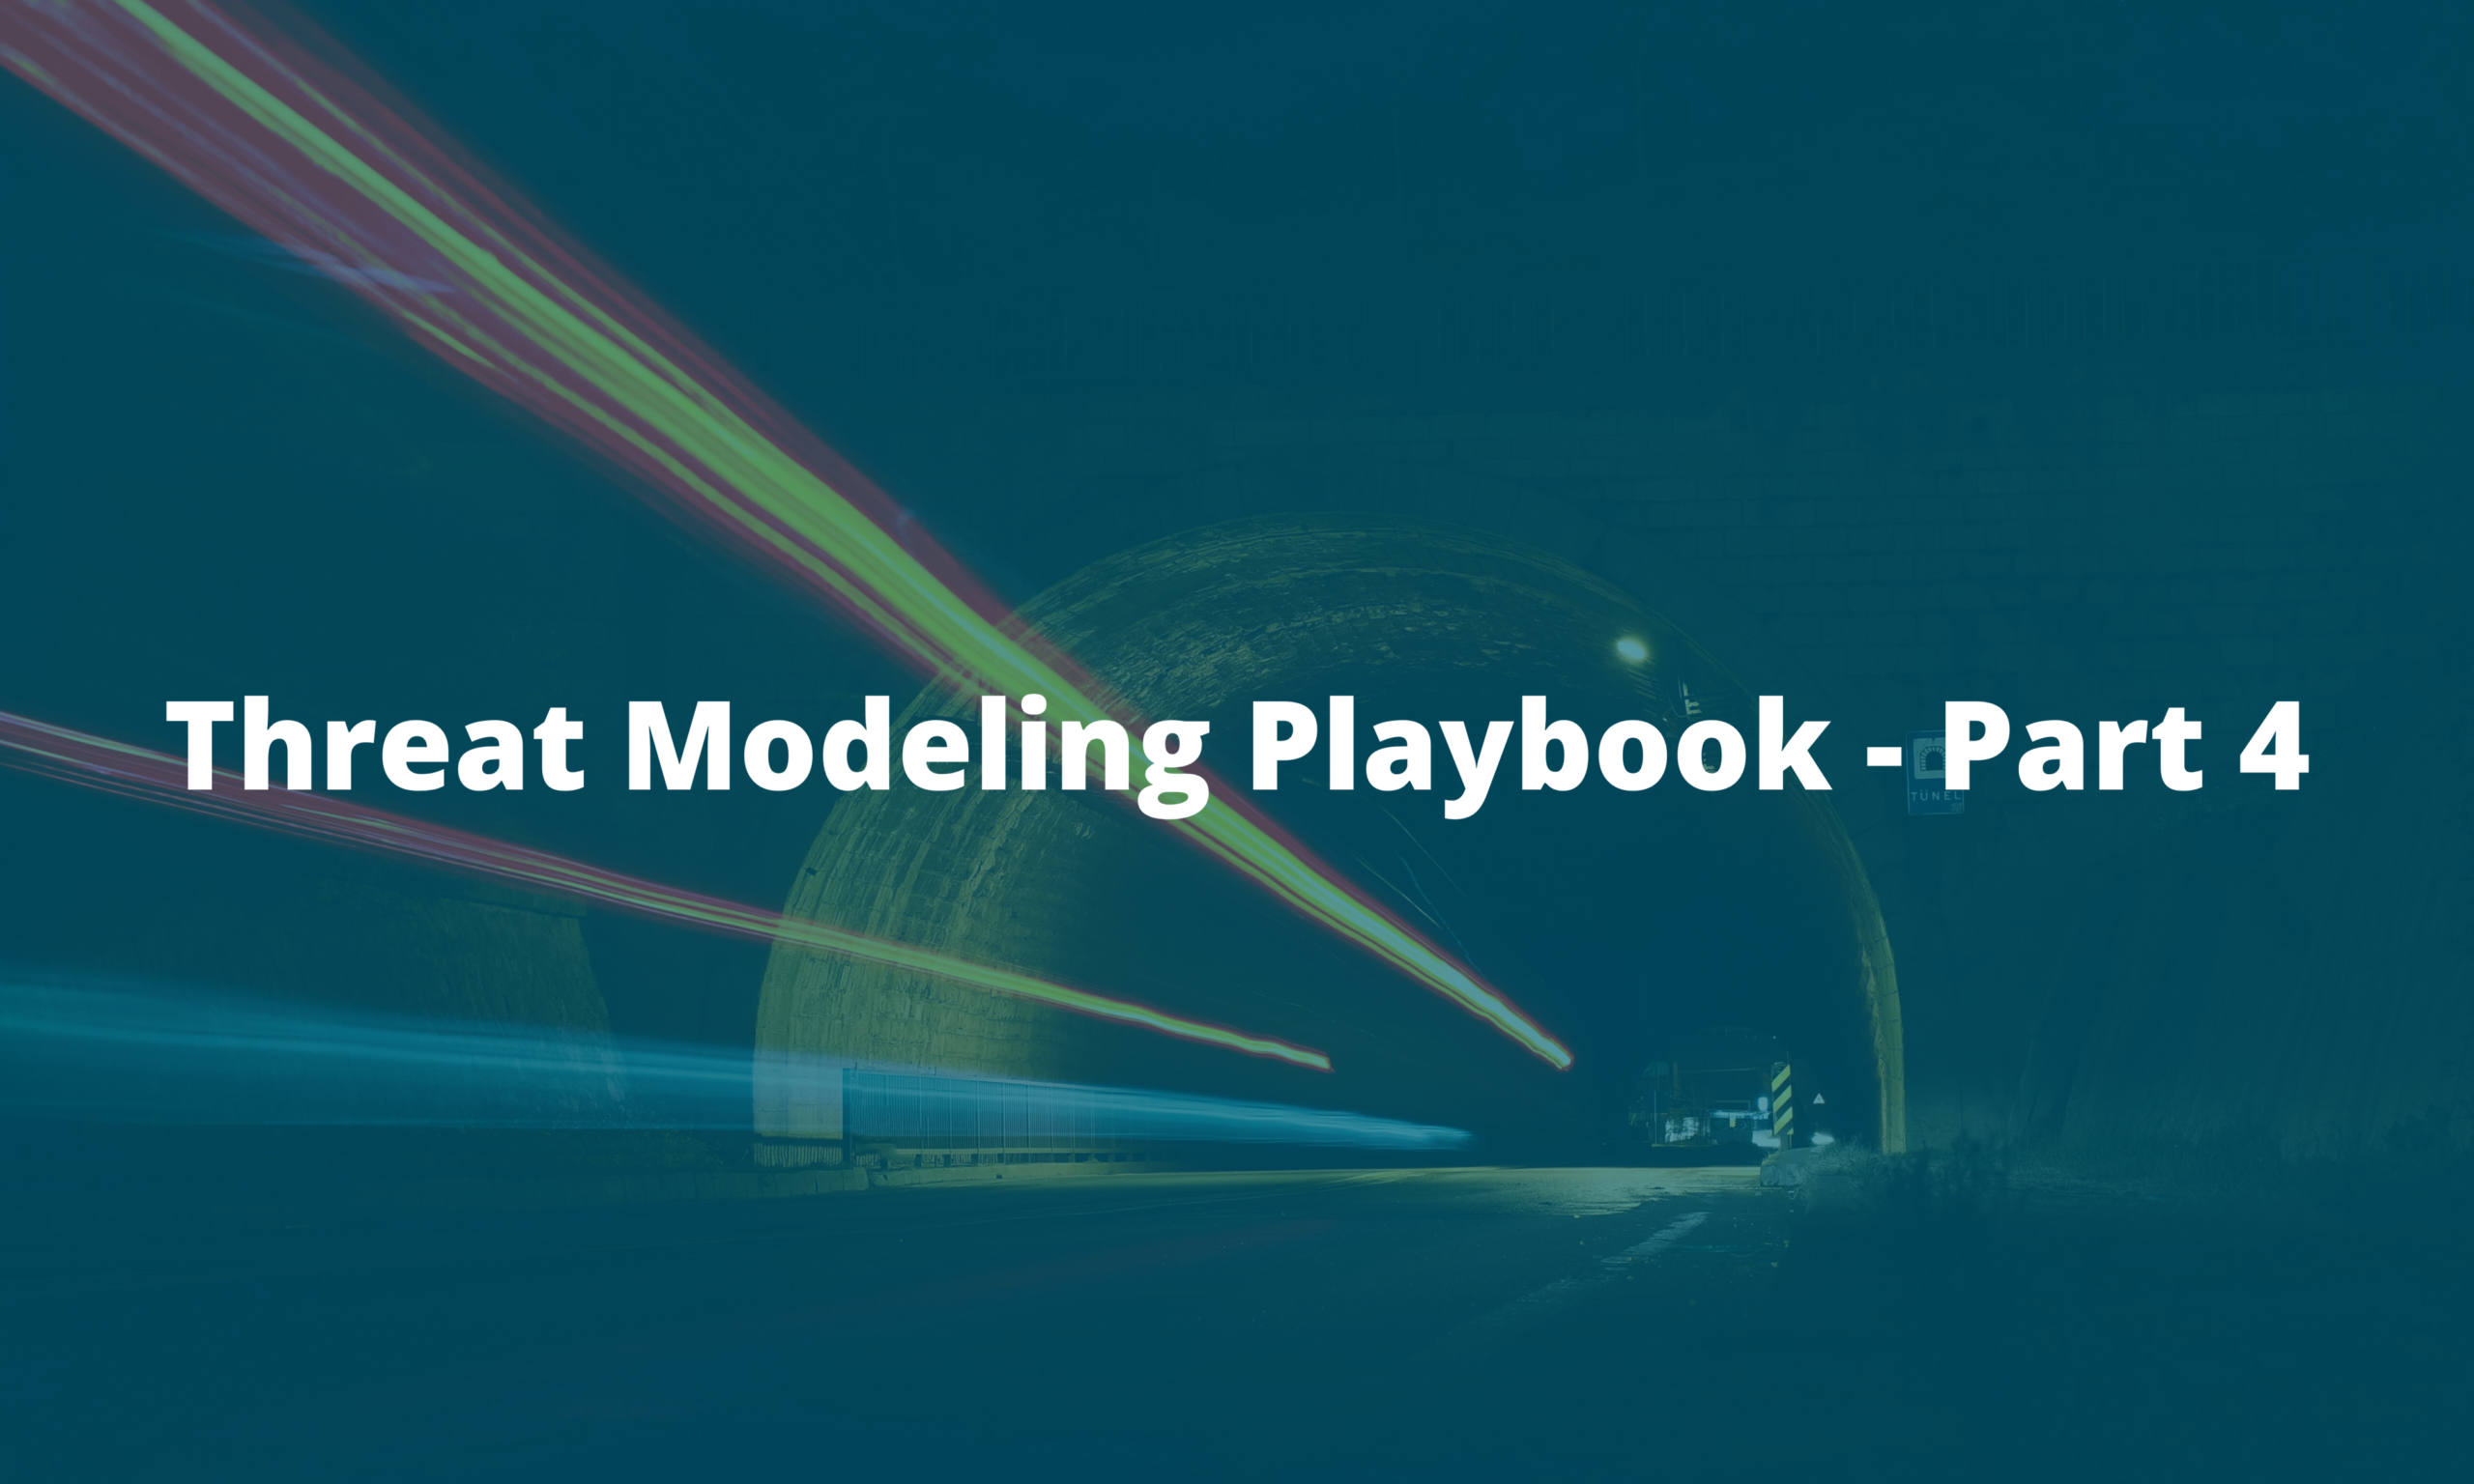 Threat Modeling Playbook Part 4